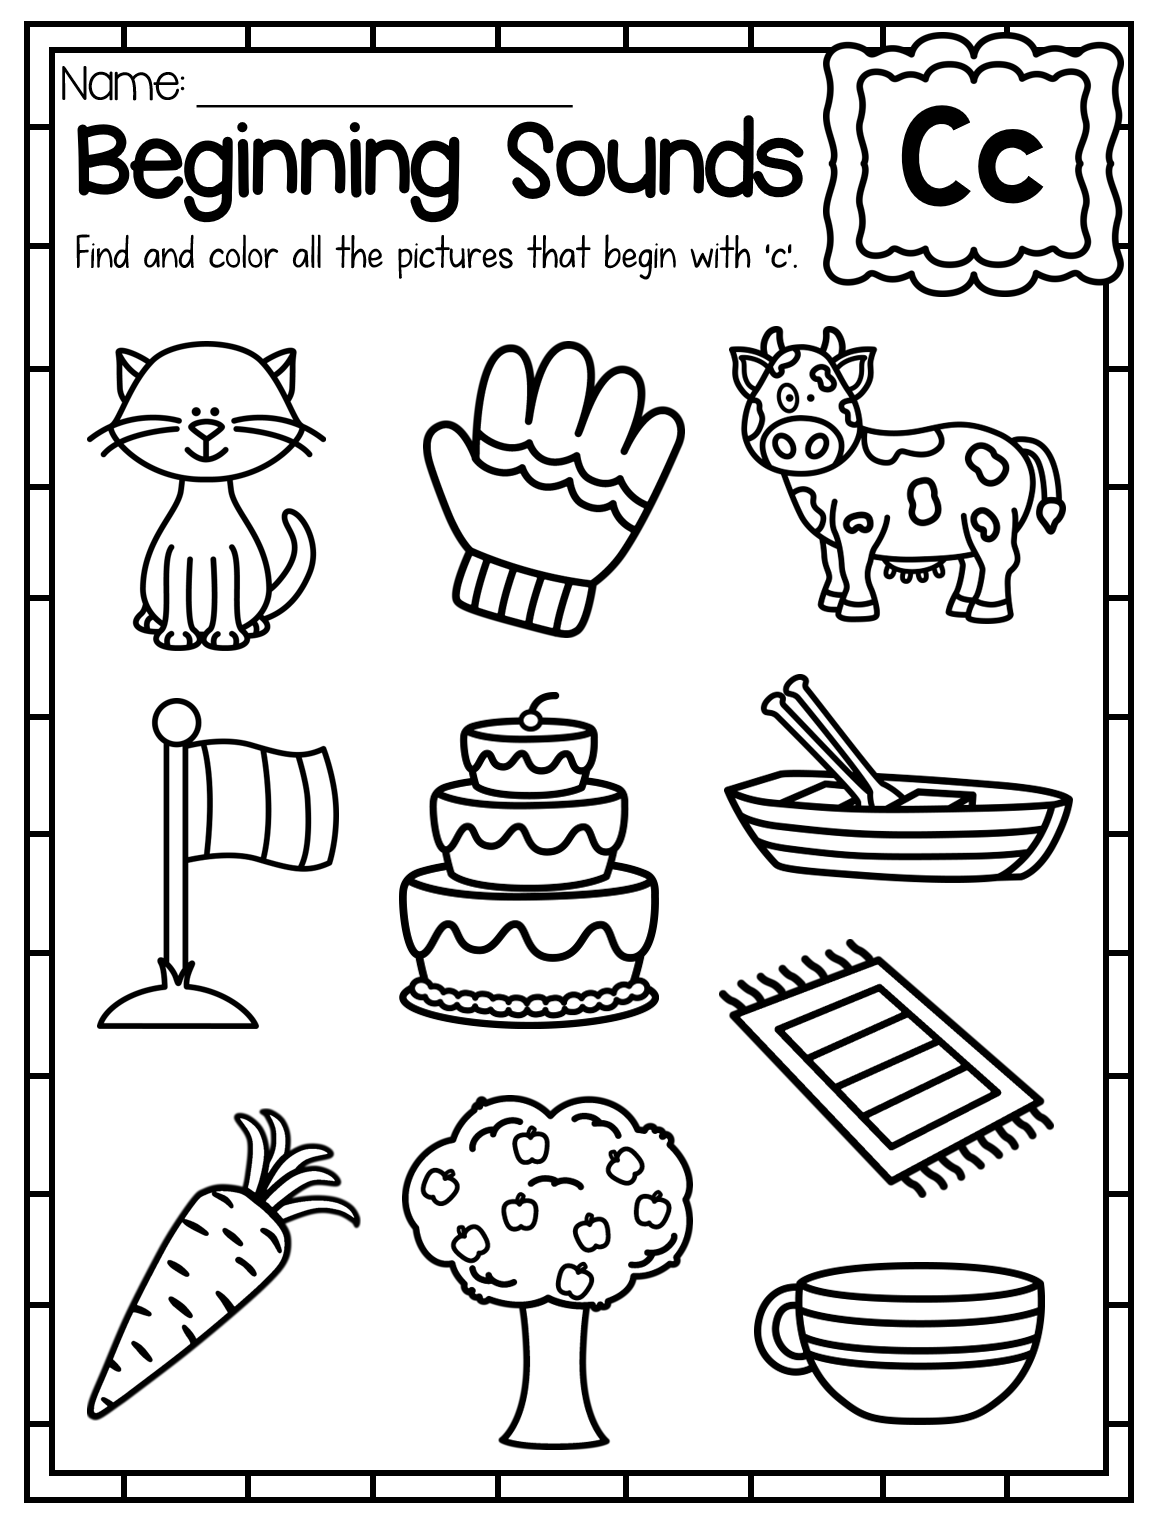 Beginning Sounds Worksheets - Color by Sound | Beginning sounds worksheets,  Phonics kindergarten, Kindergarten letters